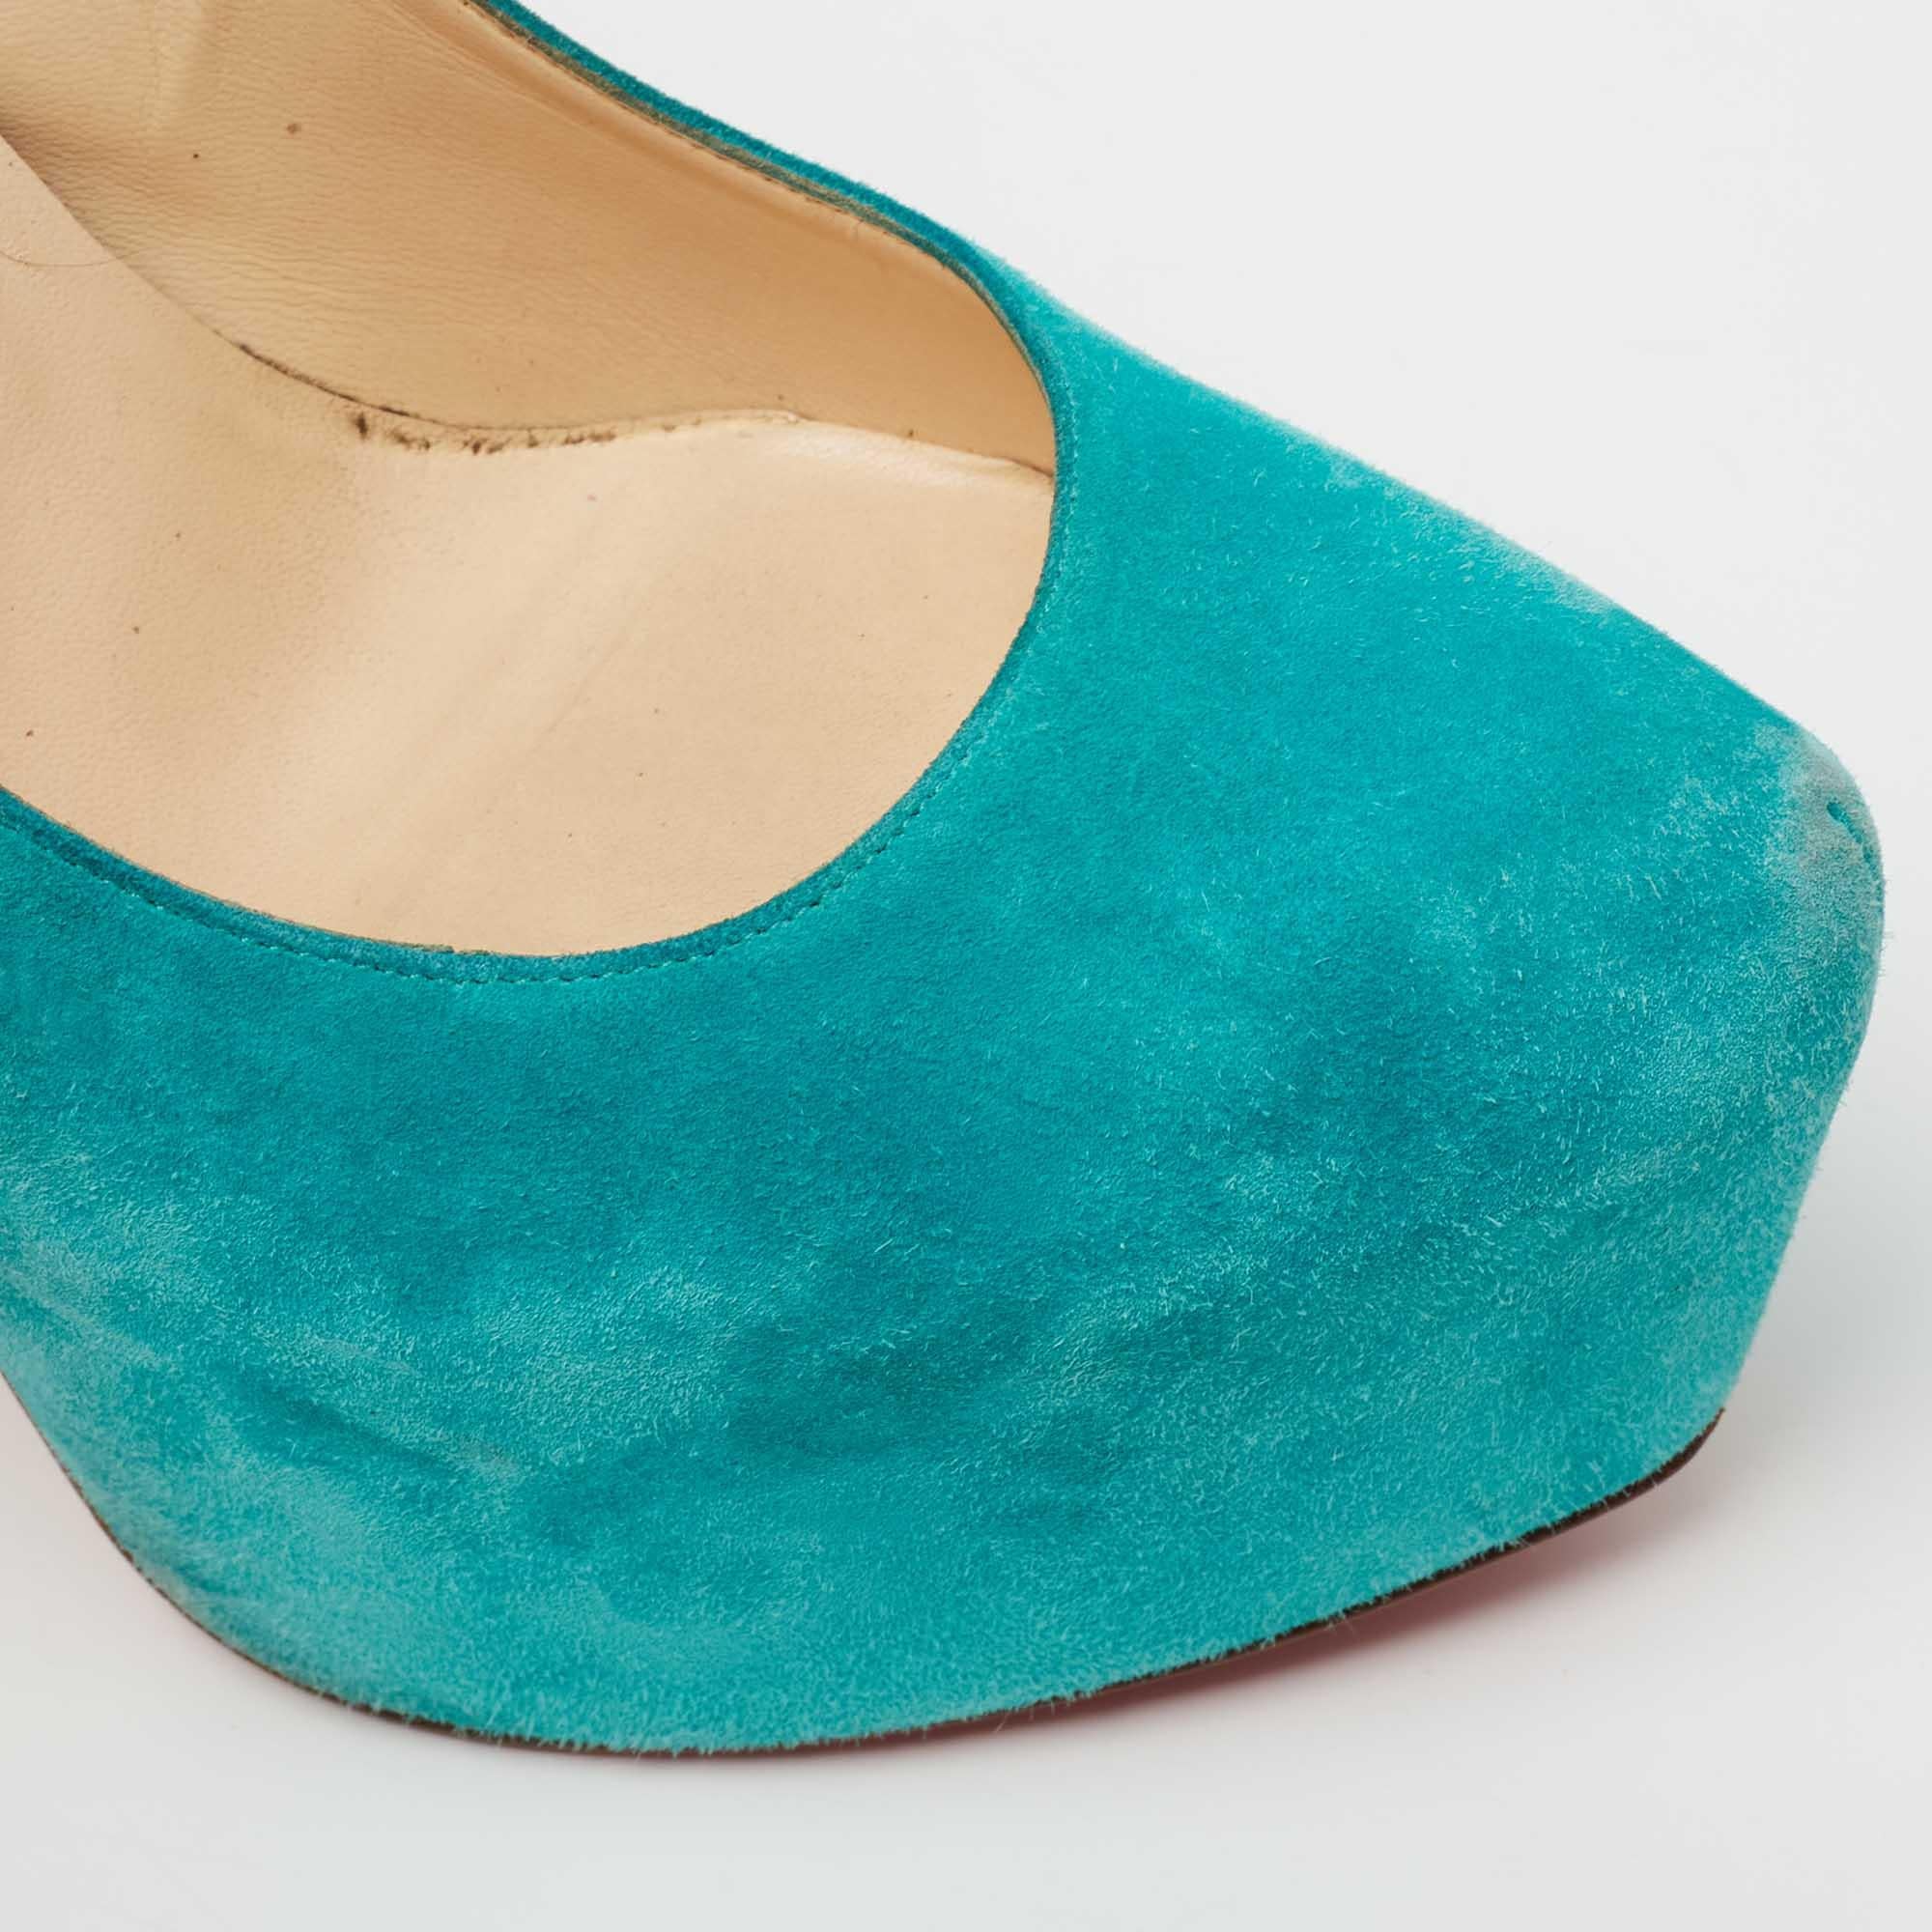 Christian Louboutin Turquoise Blue Suede Daffodile Platform Pumps Size 40 For Sale 4